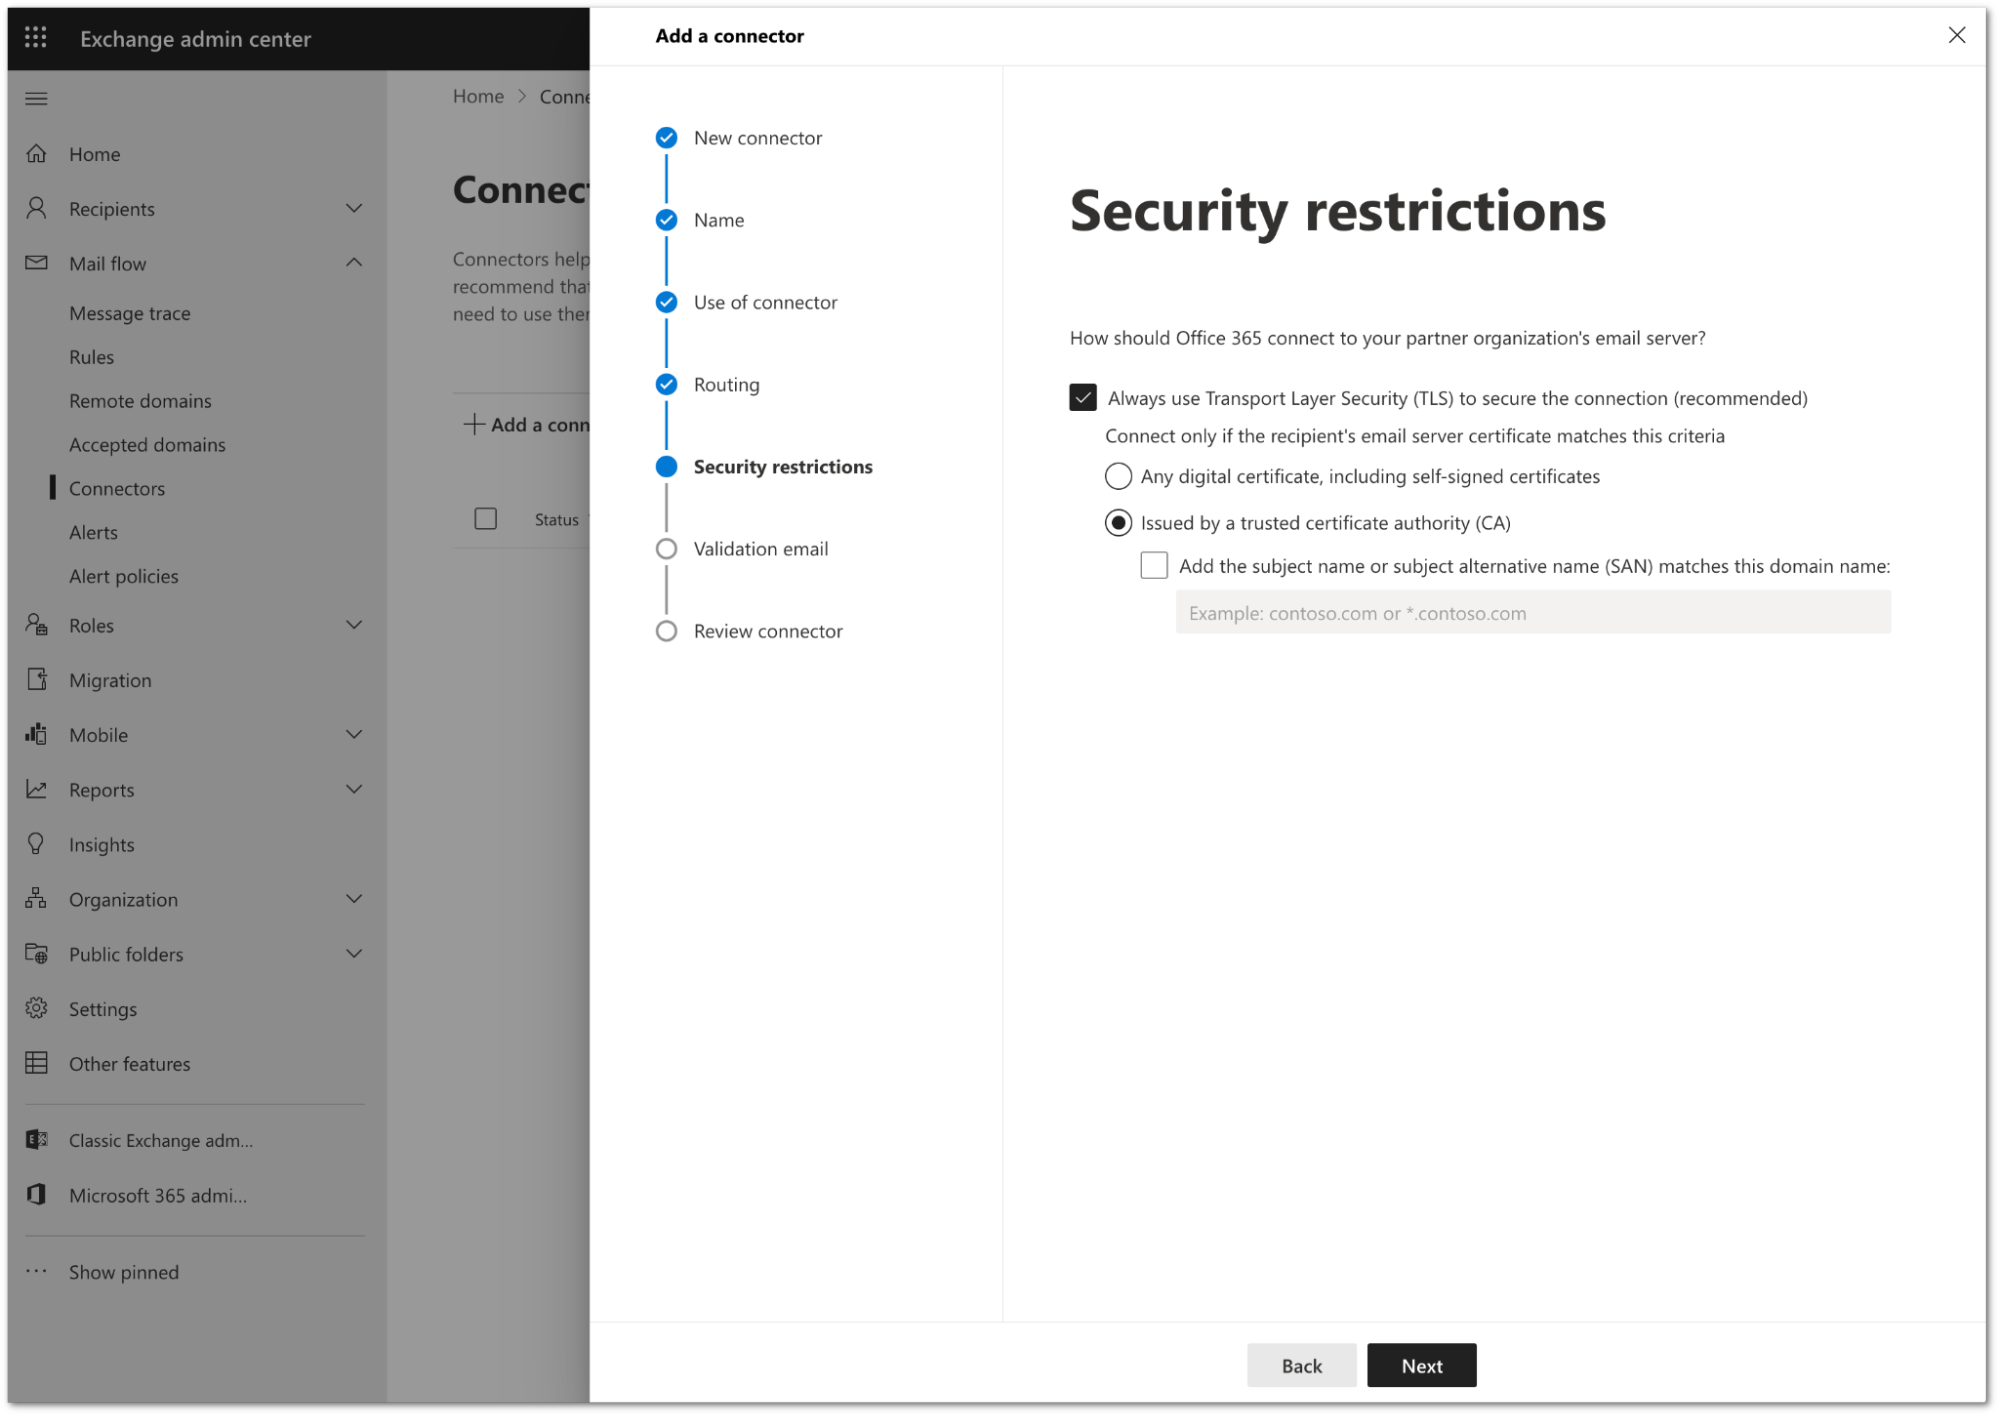 Configure security restrictions